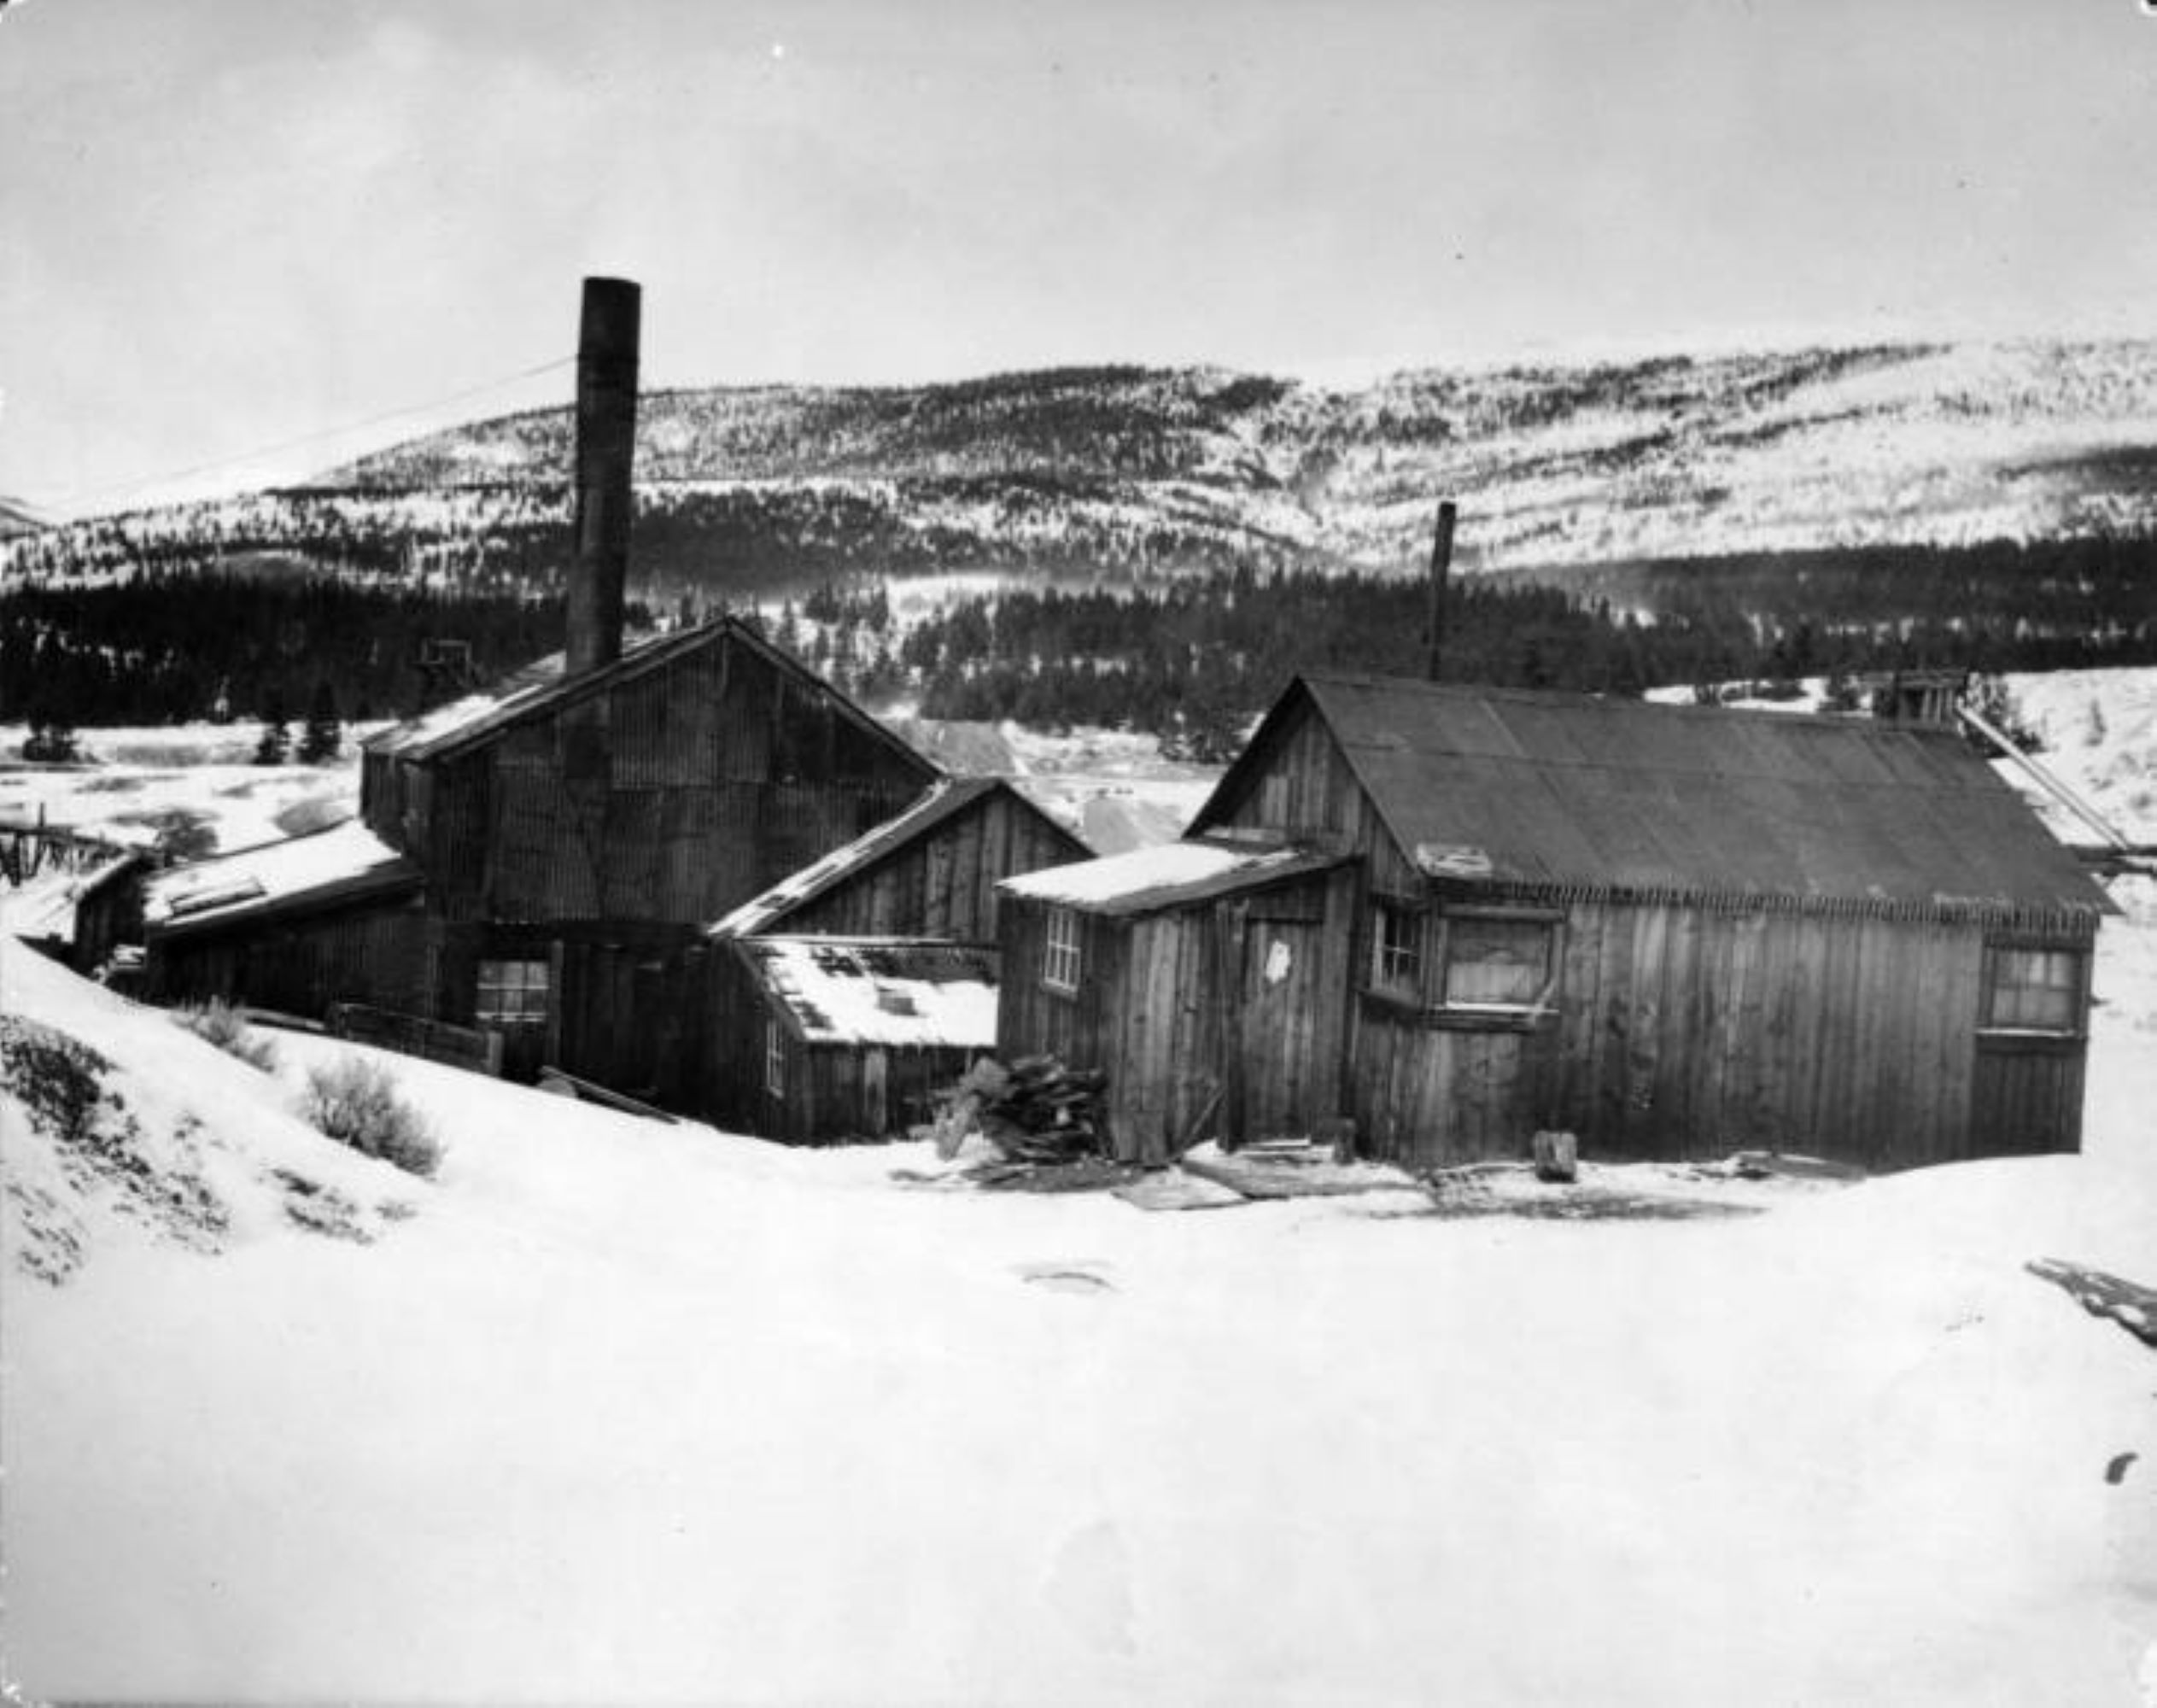 Photo of the historic Matchless Mine. Wooden building stand in the center of the black and white image, in which snow has fallen and is covering the ground around the buildings as well as dusting the mountains visible in the background. The buildings have few windows, and two of them have metal chimney pipes standing up in the air. Icicles hang from the metal roofs. There are no people visible.